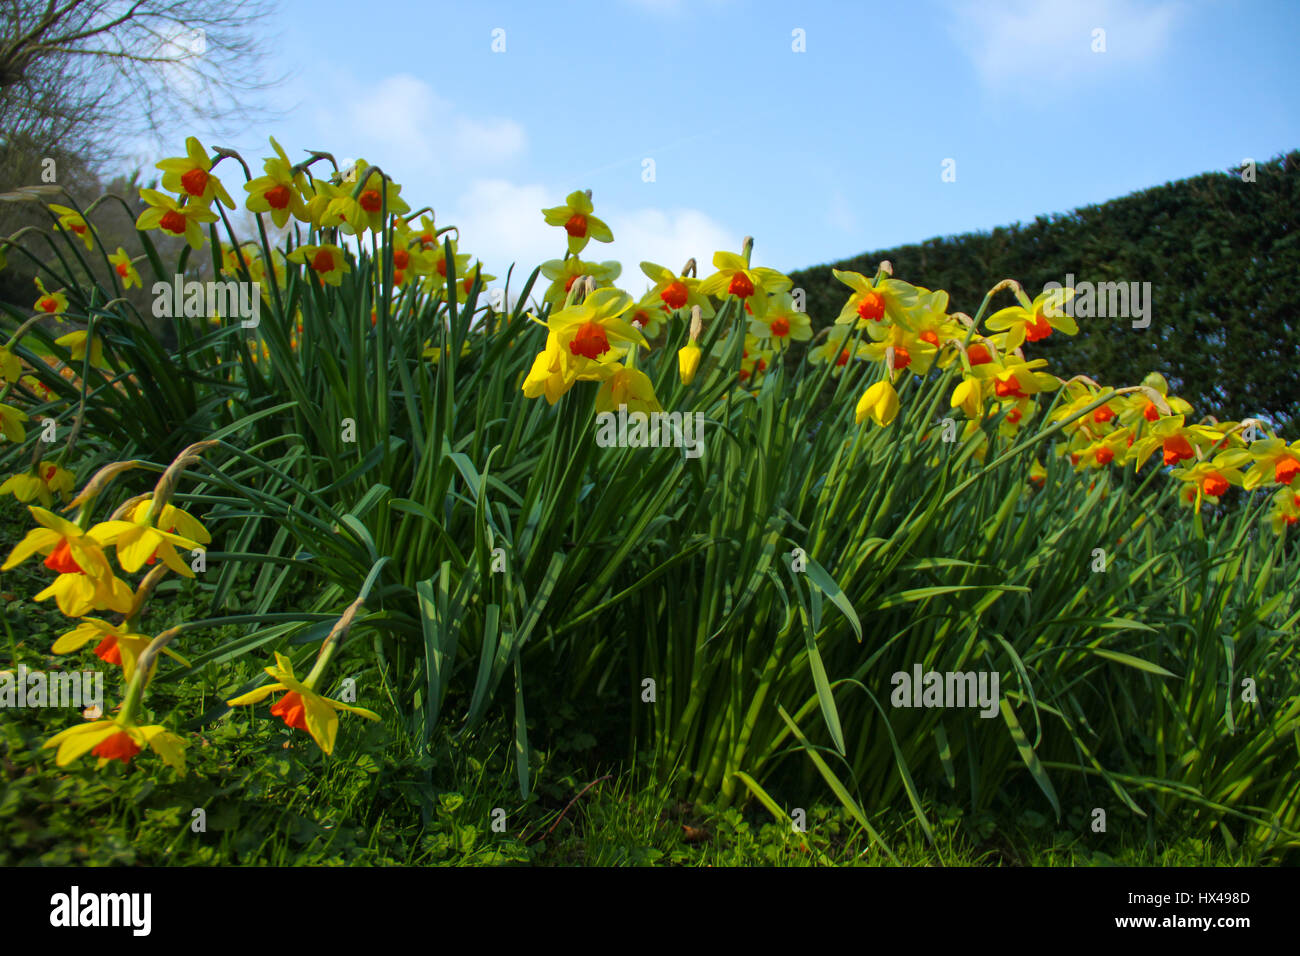 London, UK. March 24, 2017: Spring daffodil flowers in bloom at a walk way in  Port Lympne Zoo on March 24, 2017. Port Lympne Reserve near the town of Hythe in Kent, England is set in 600 acres and incorporates the historic mansion and landscaped gardens. © David Mbiyu/Alamy Live News Stock Photo